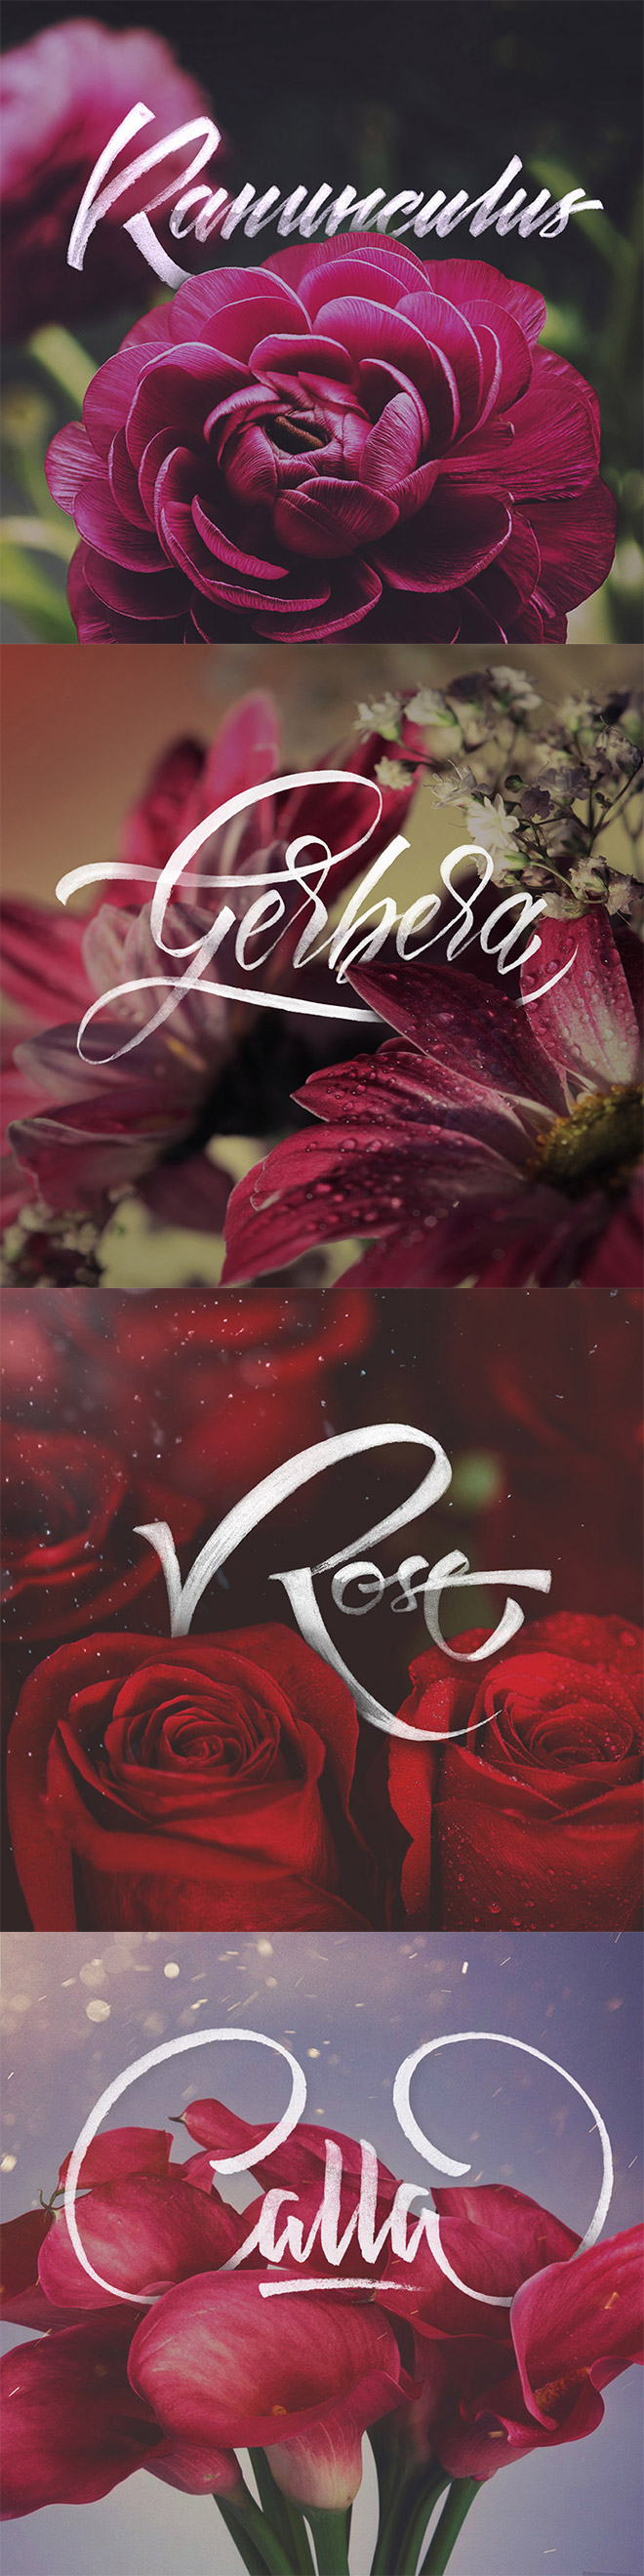 Just Flowers & Letters by Levchenko Calligraphy